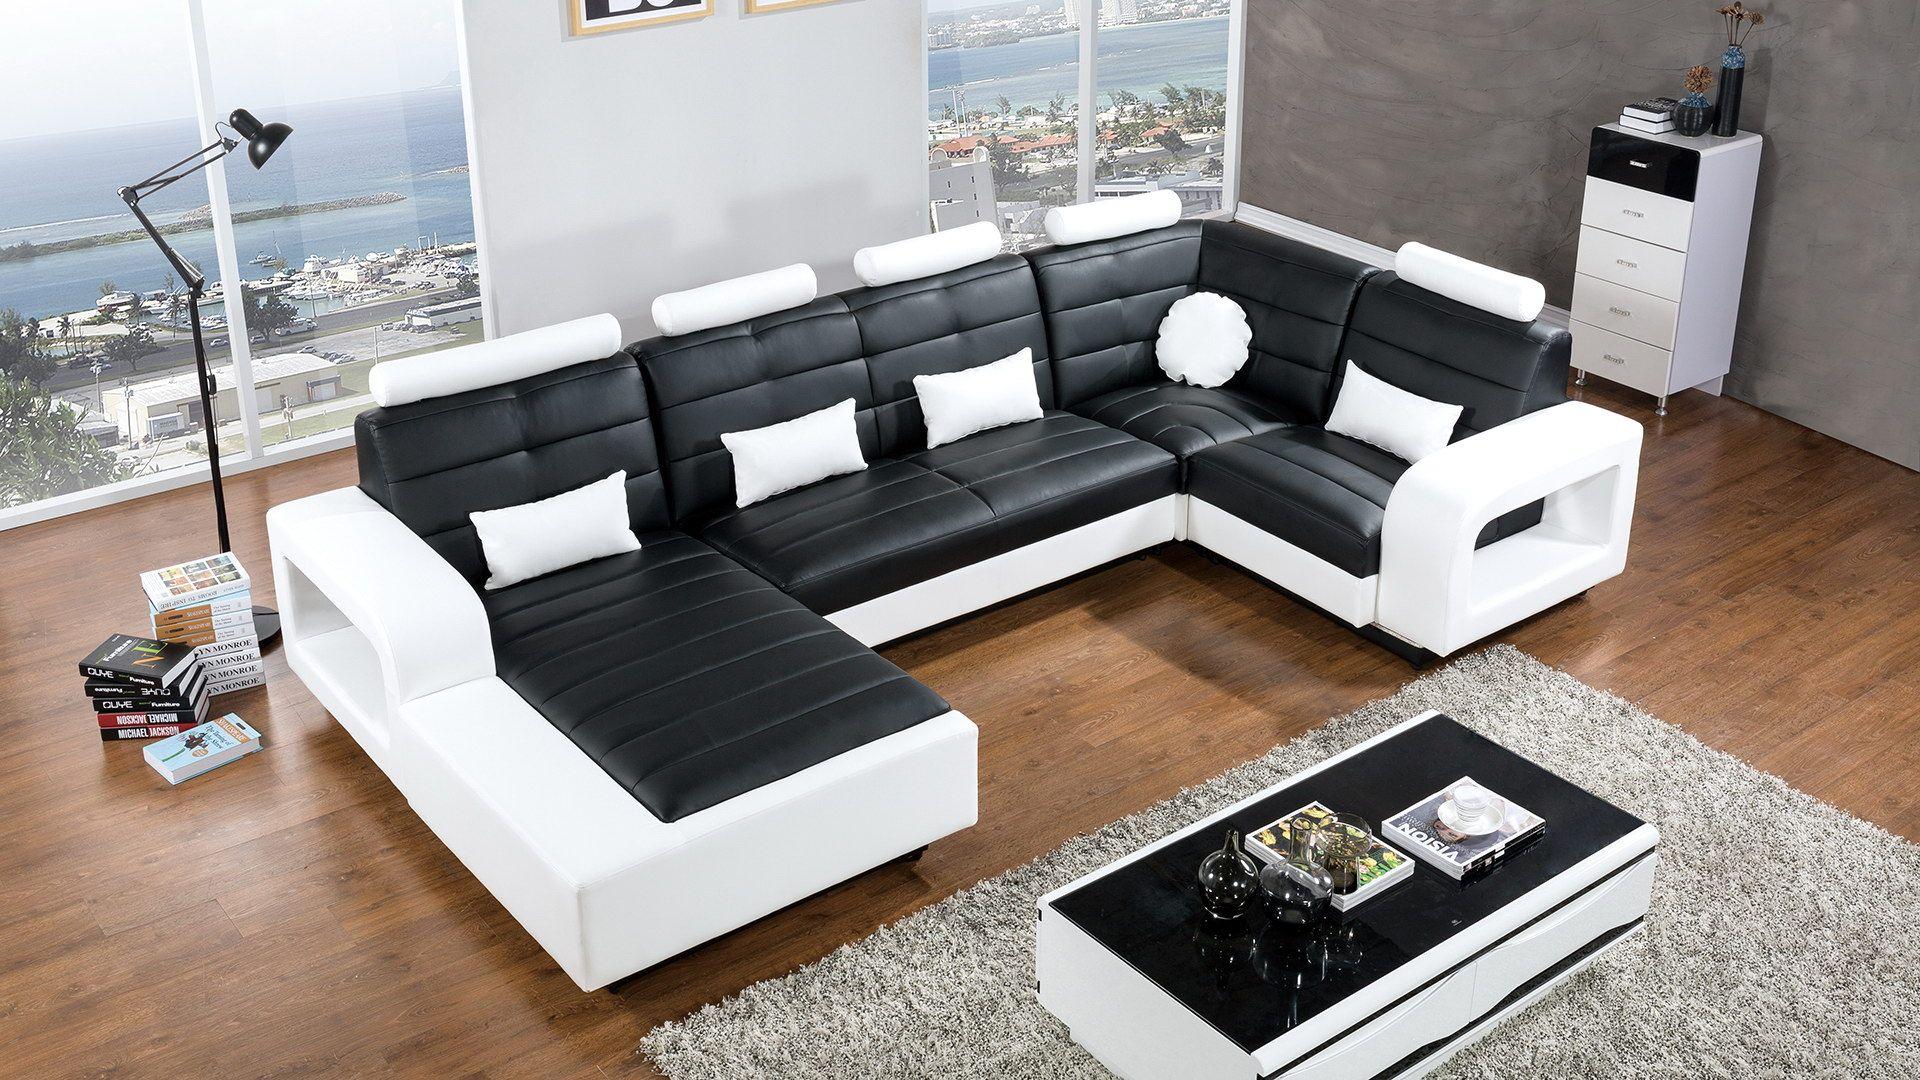 Contemporary, Modern Sectional Sofa AE-LD800-BK.W AE-LD800L-BK.W in White, Black Bonded Leather